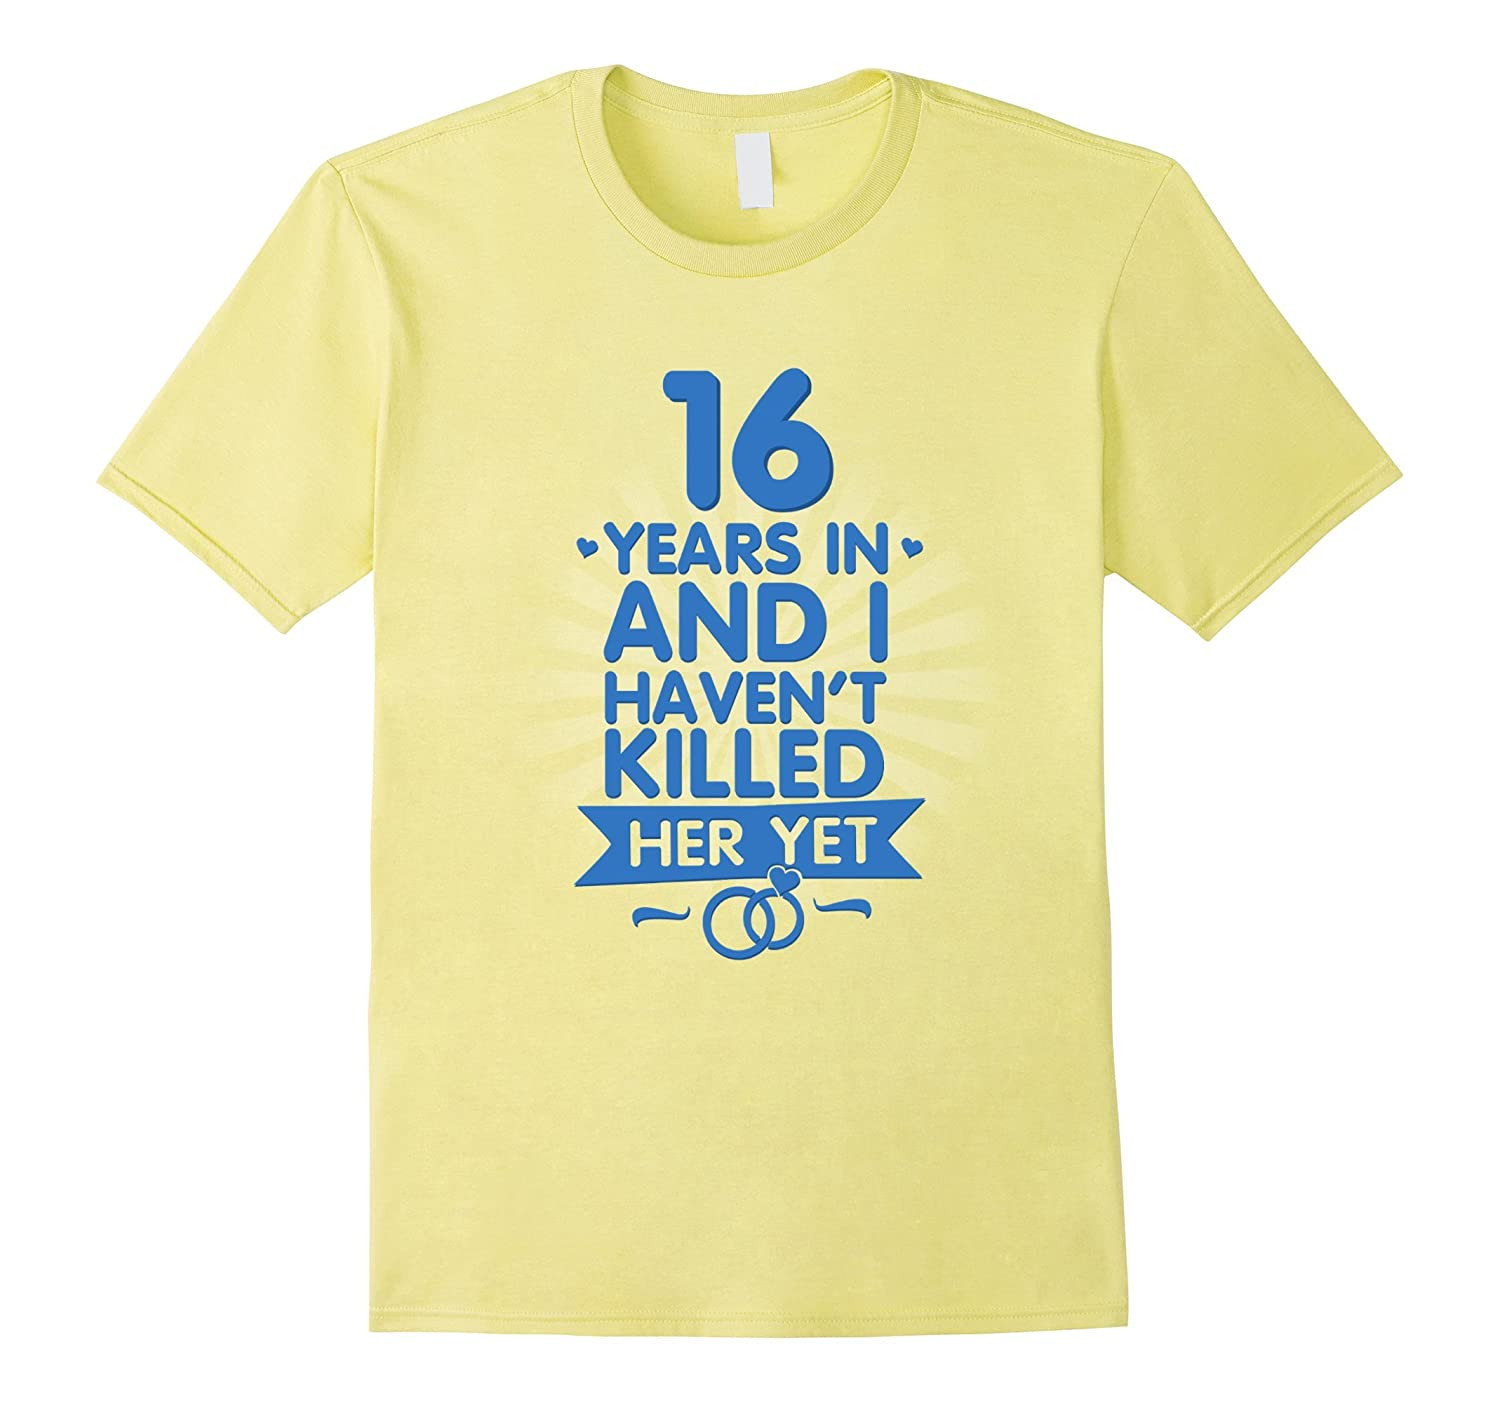 16 Year Anniversary Gift Ideas
 16 Years of Marriage Shirt 16th Anniversary Gift for